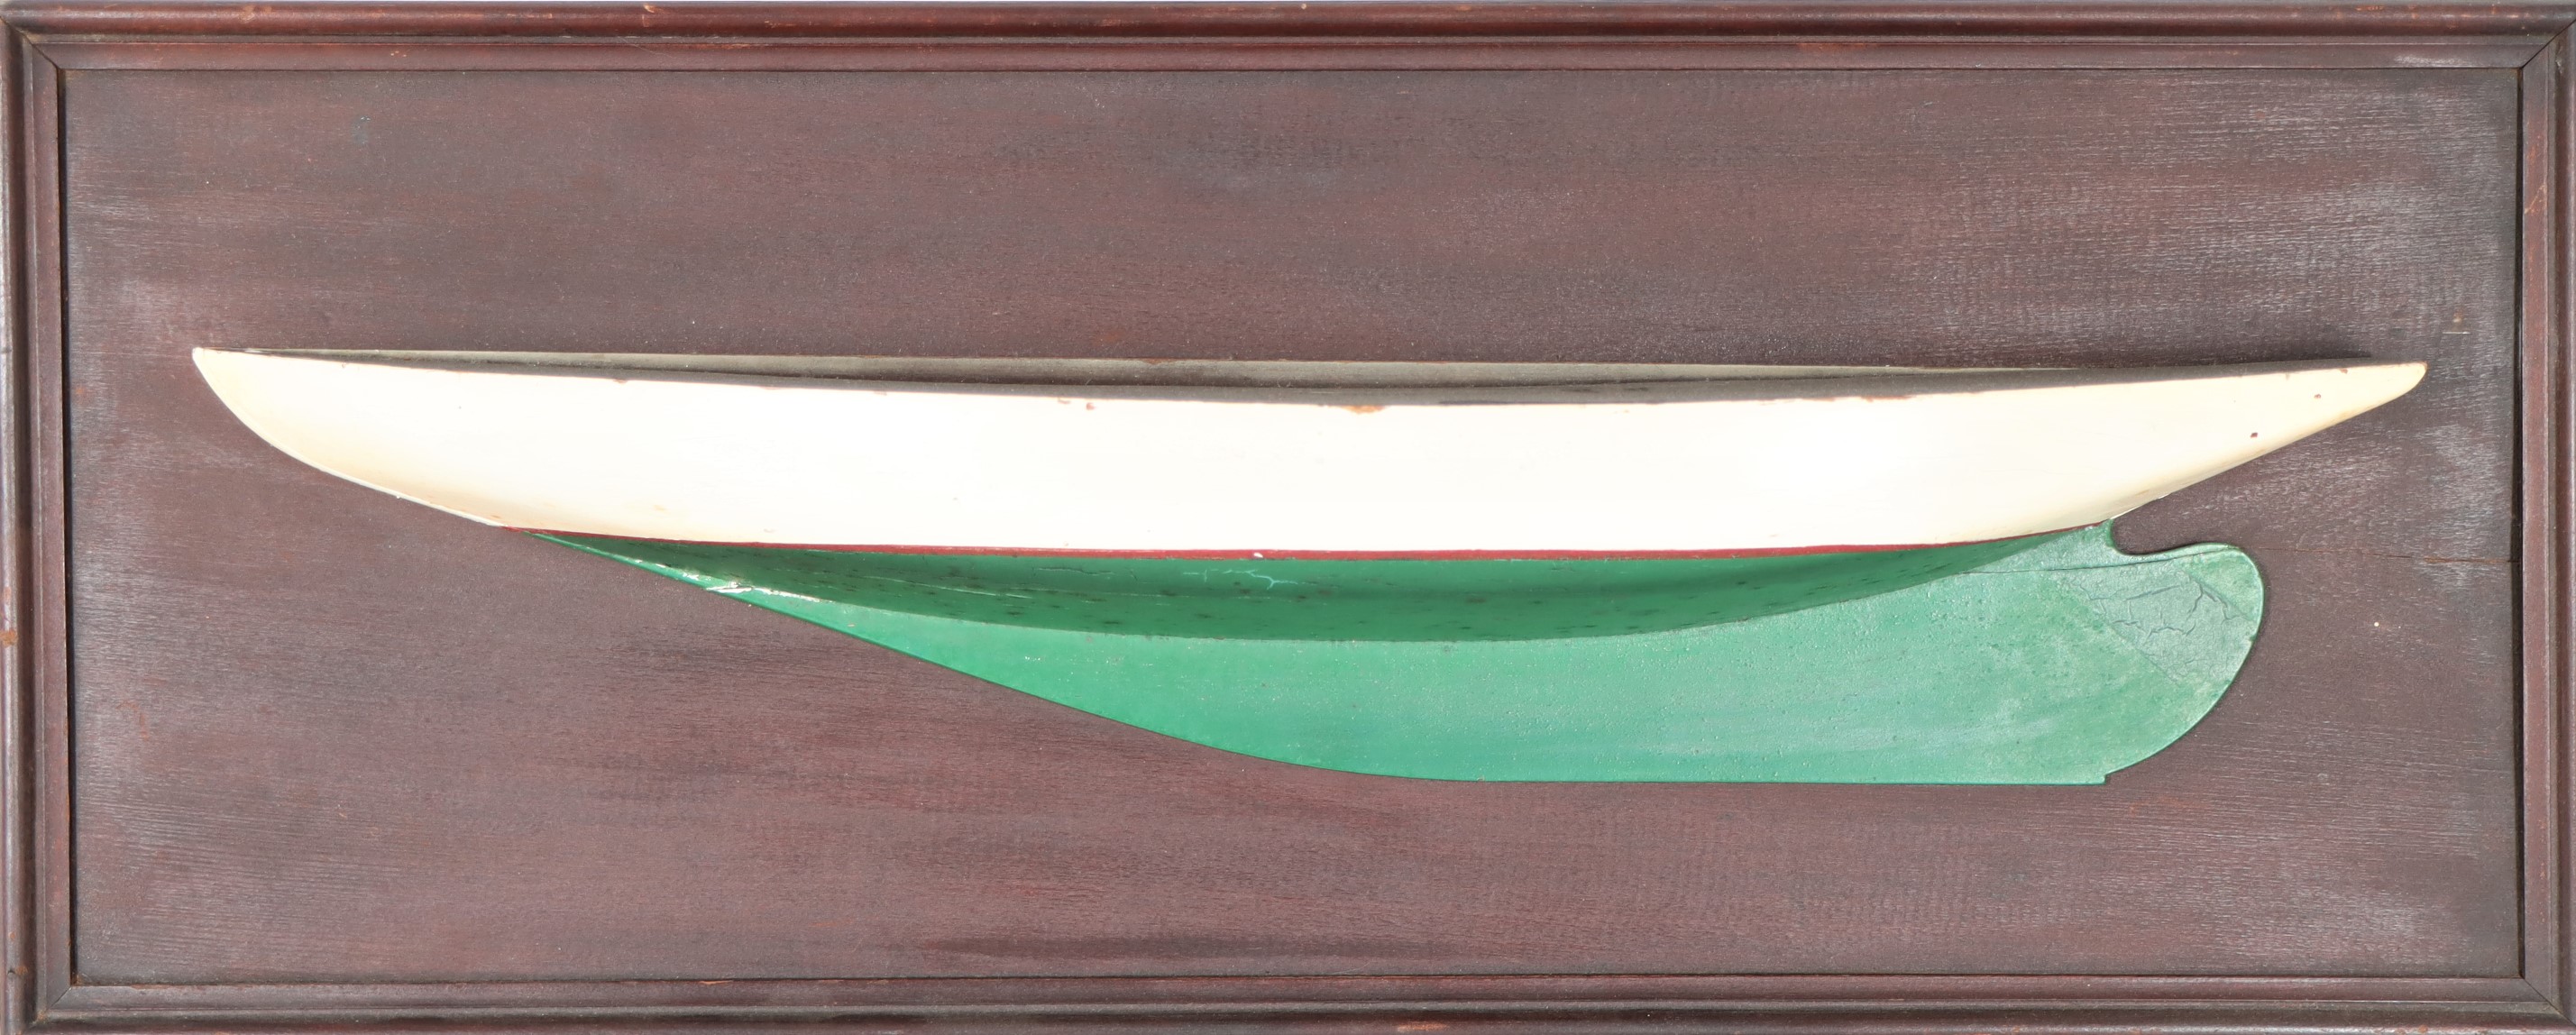 Mounted Wooden Half Boat Hull - Image 2 of 6